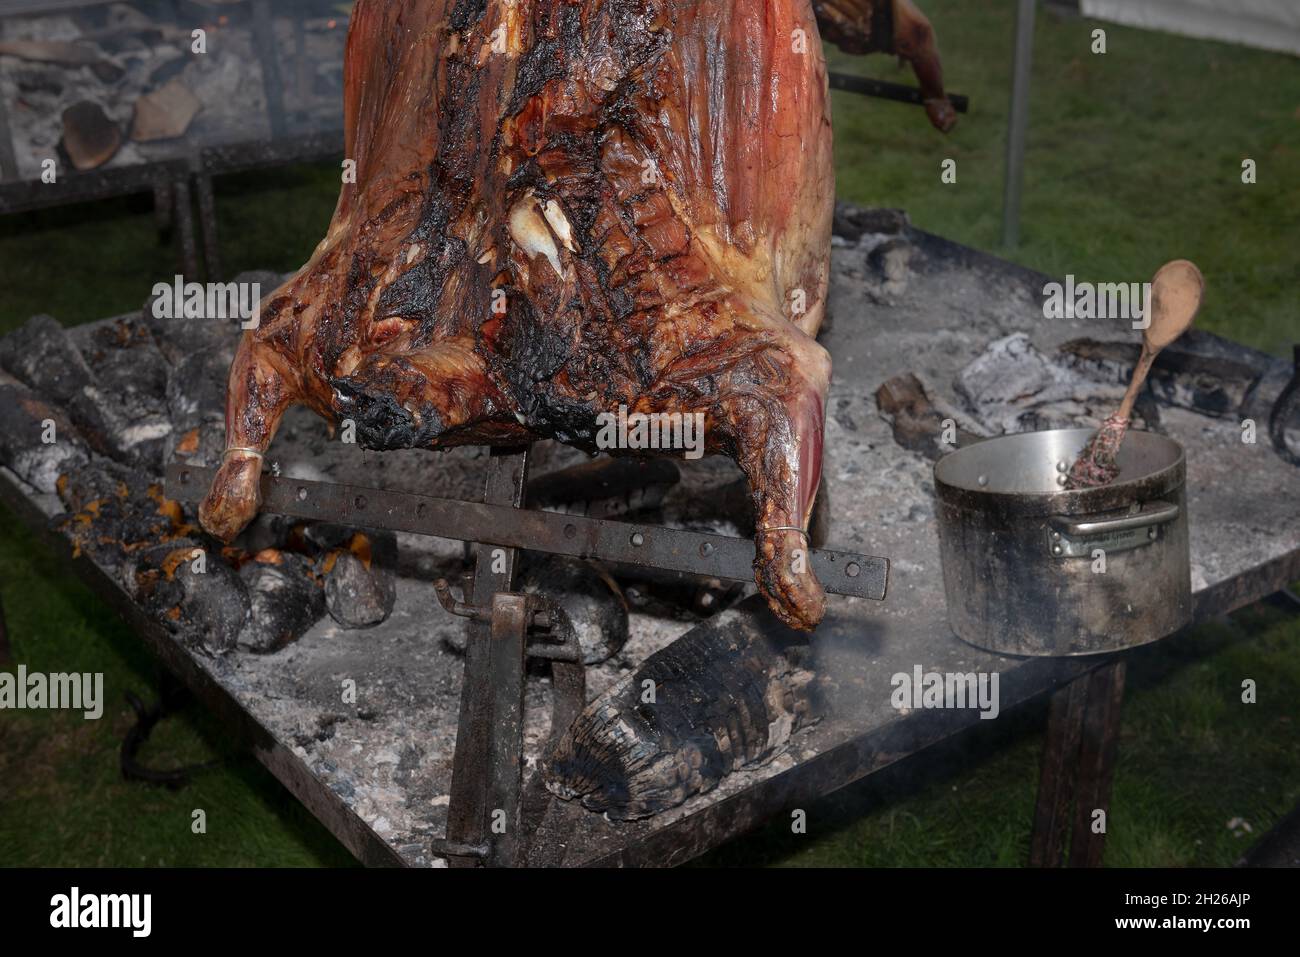 Smoke impregnated aromas infuse into the oils and meat of a barbecued sheep over an open wood and charcoal fire Stock Photo